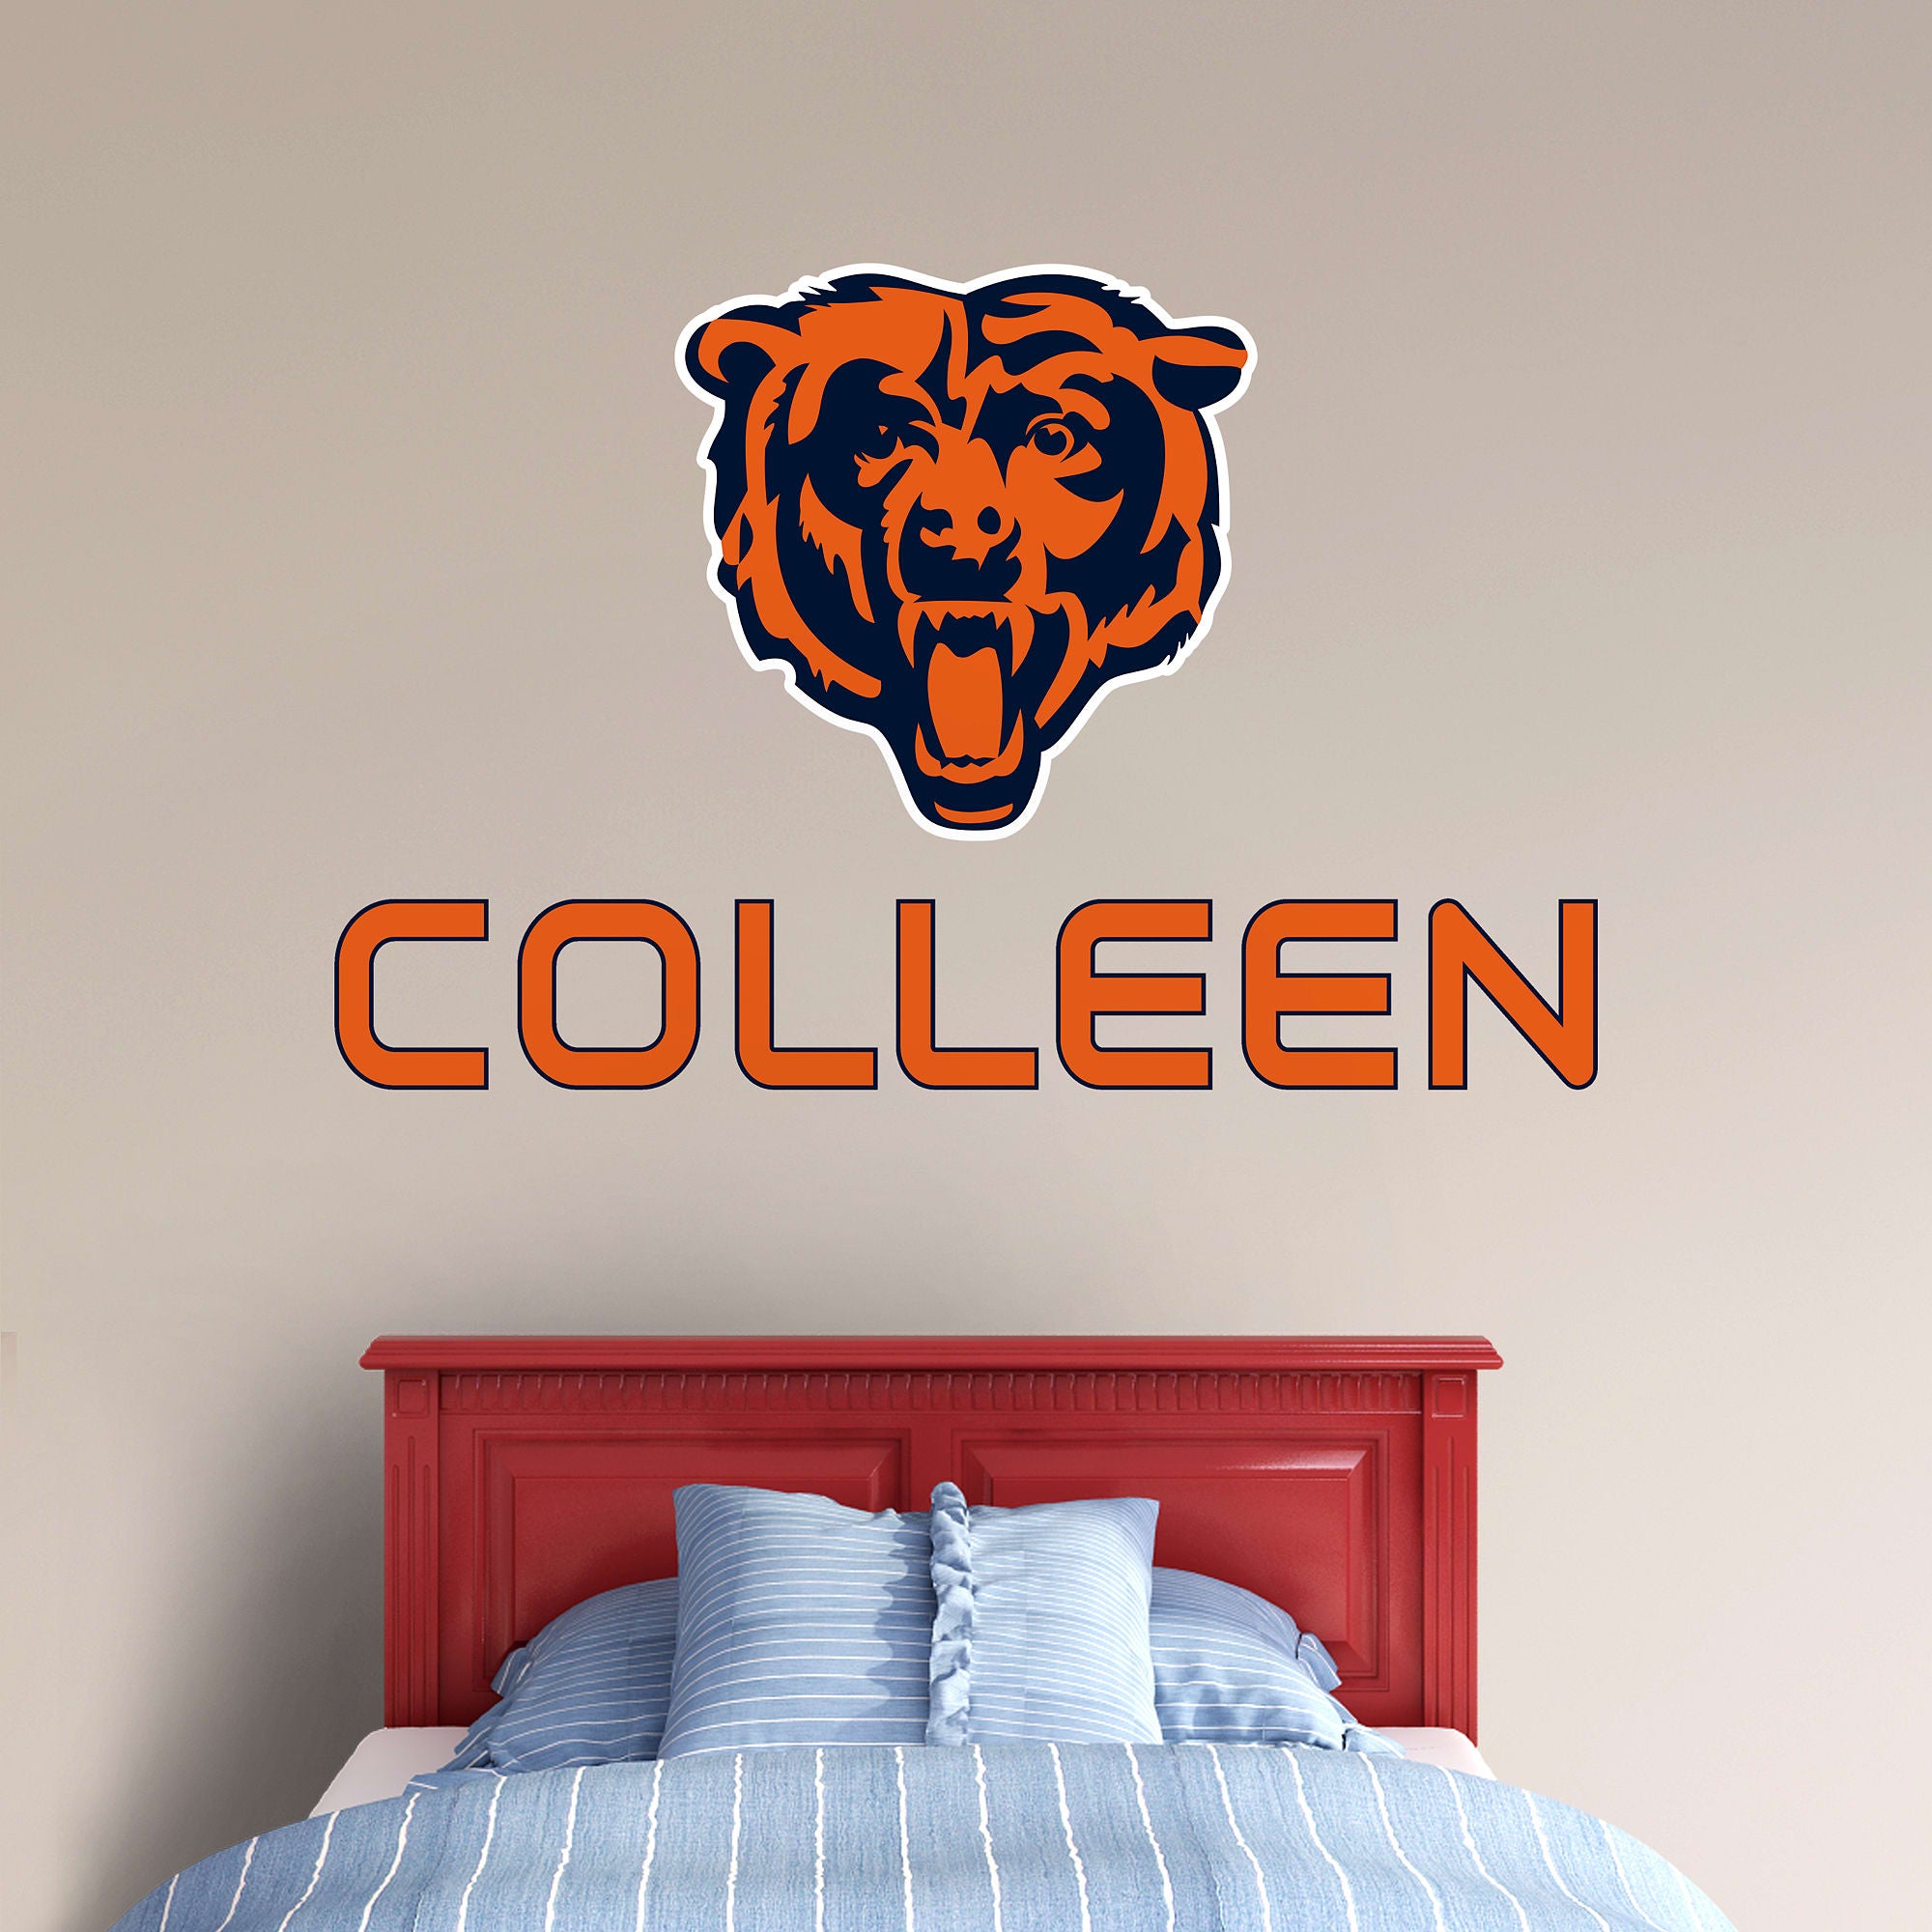 Chicago Bears: Bear Logo Stacked Personalized Name - Officially Licensed NFL Transfer Decal in Orange (52"W x 39.5"H) by Fathead